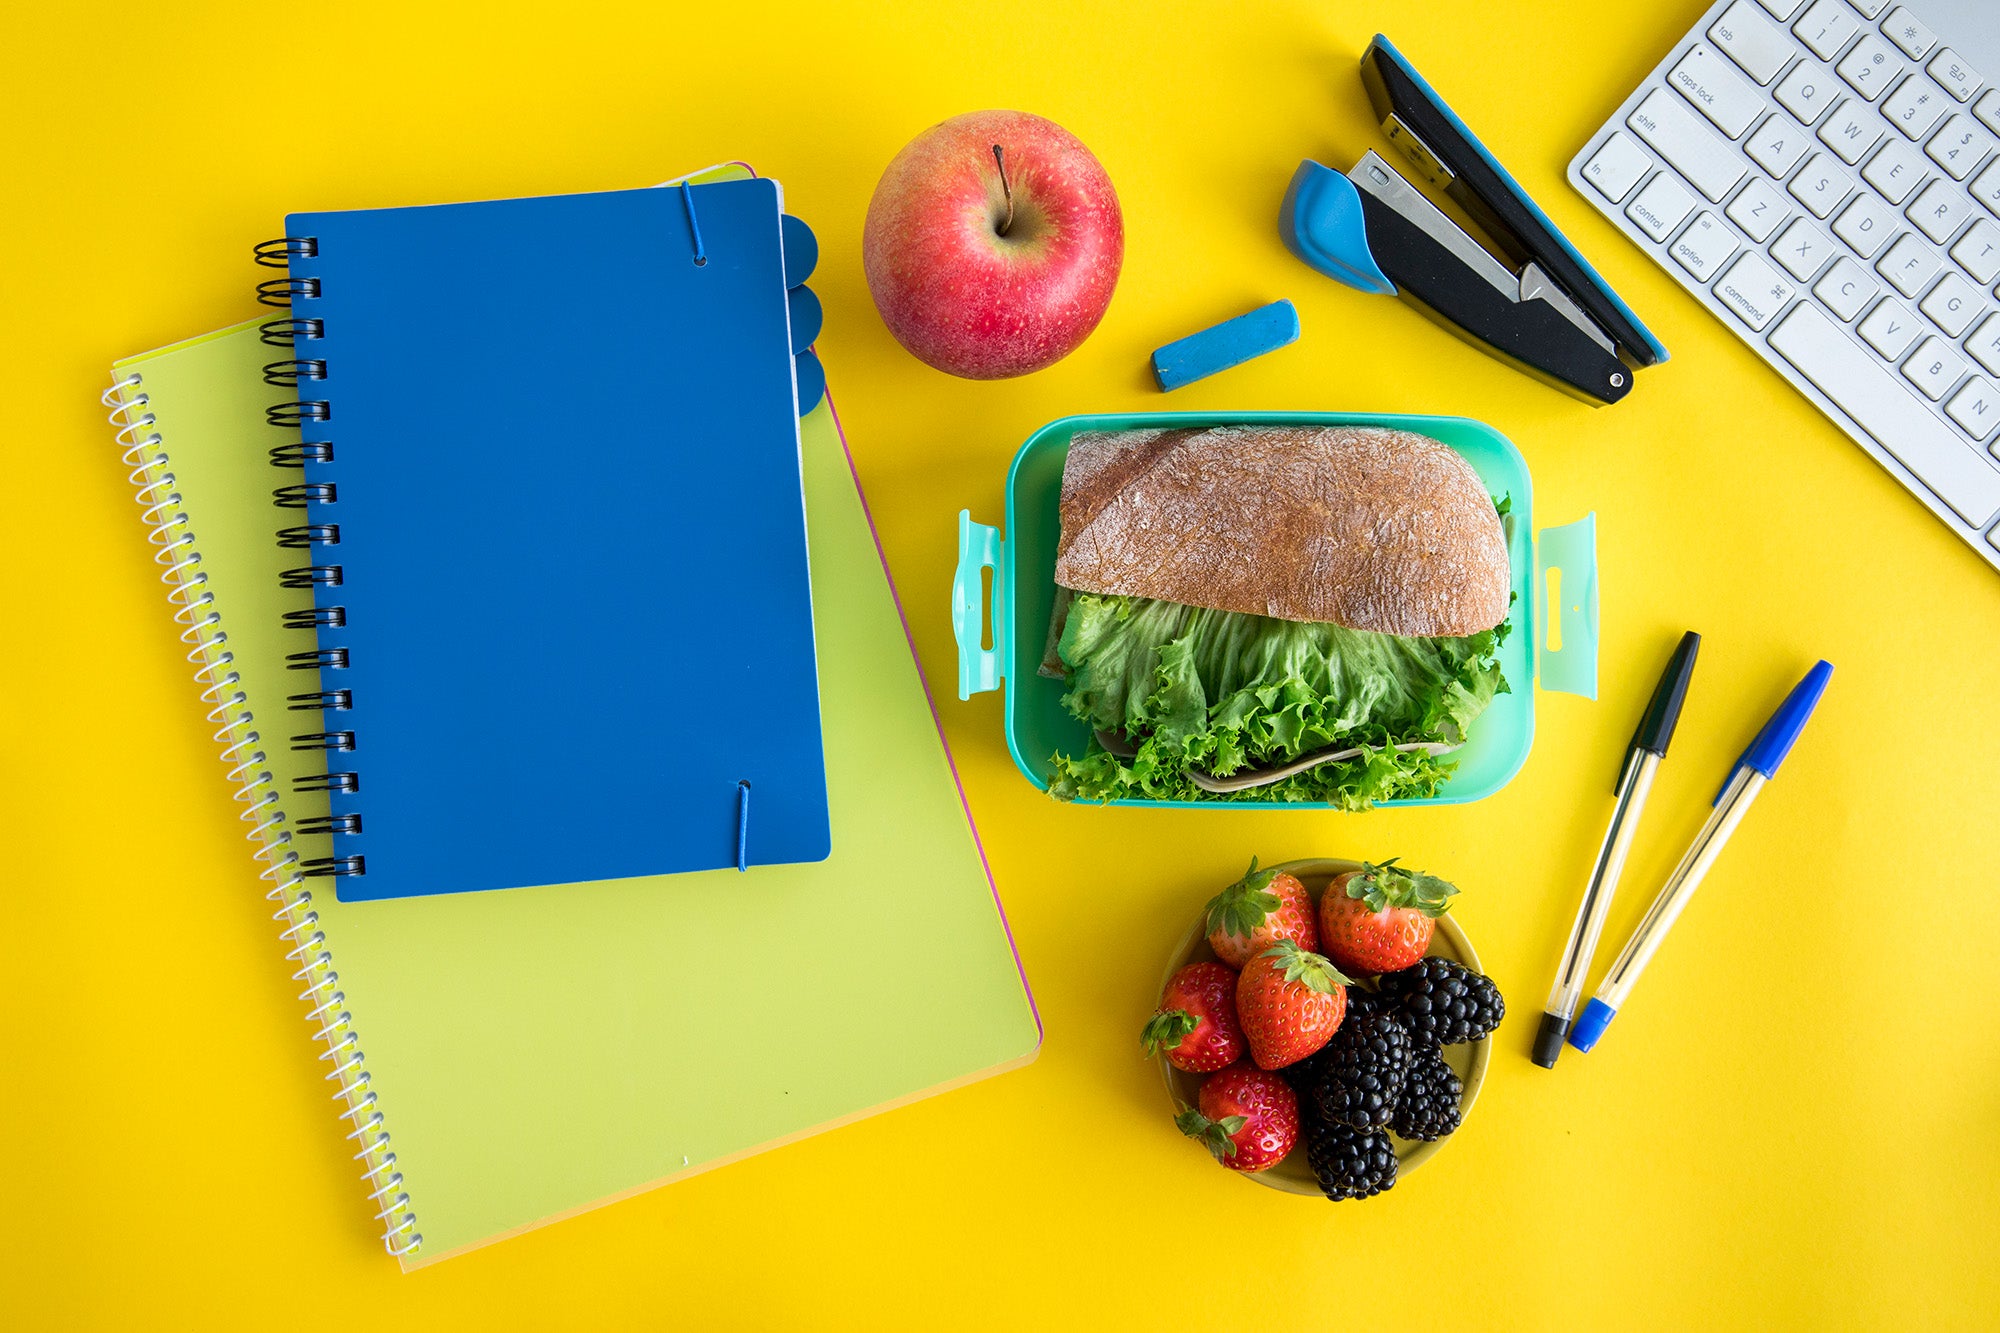 Explore this back to school nutrition rules and tips for snacking